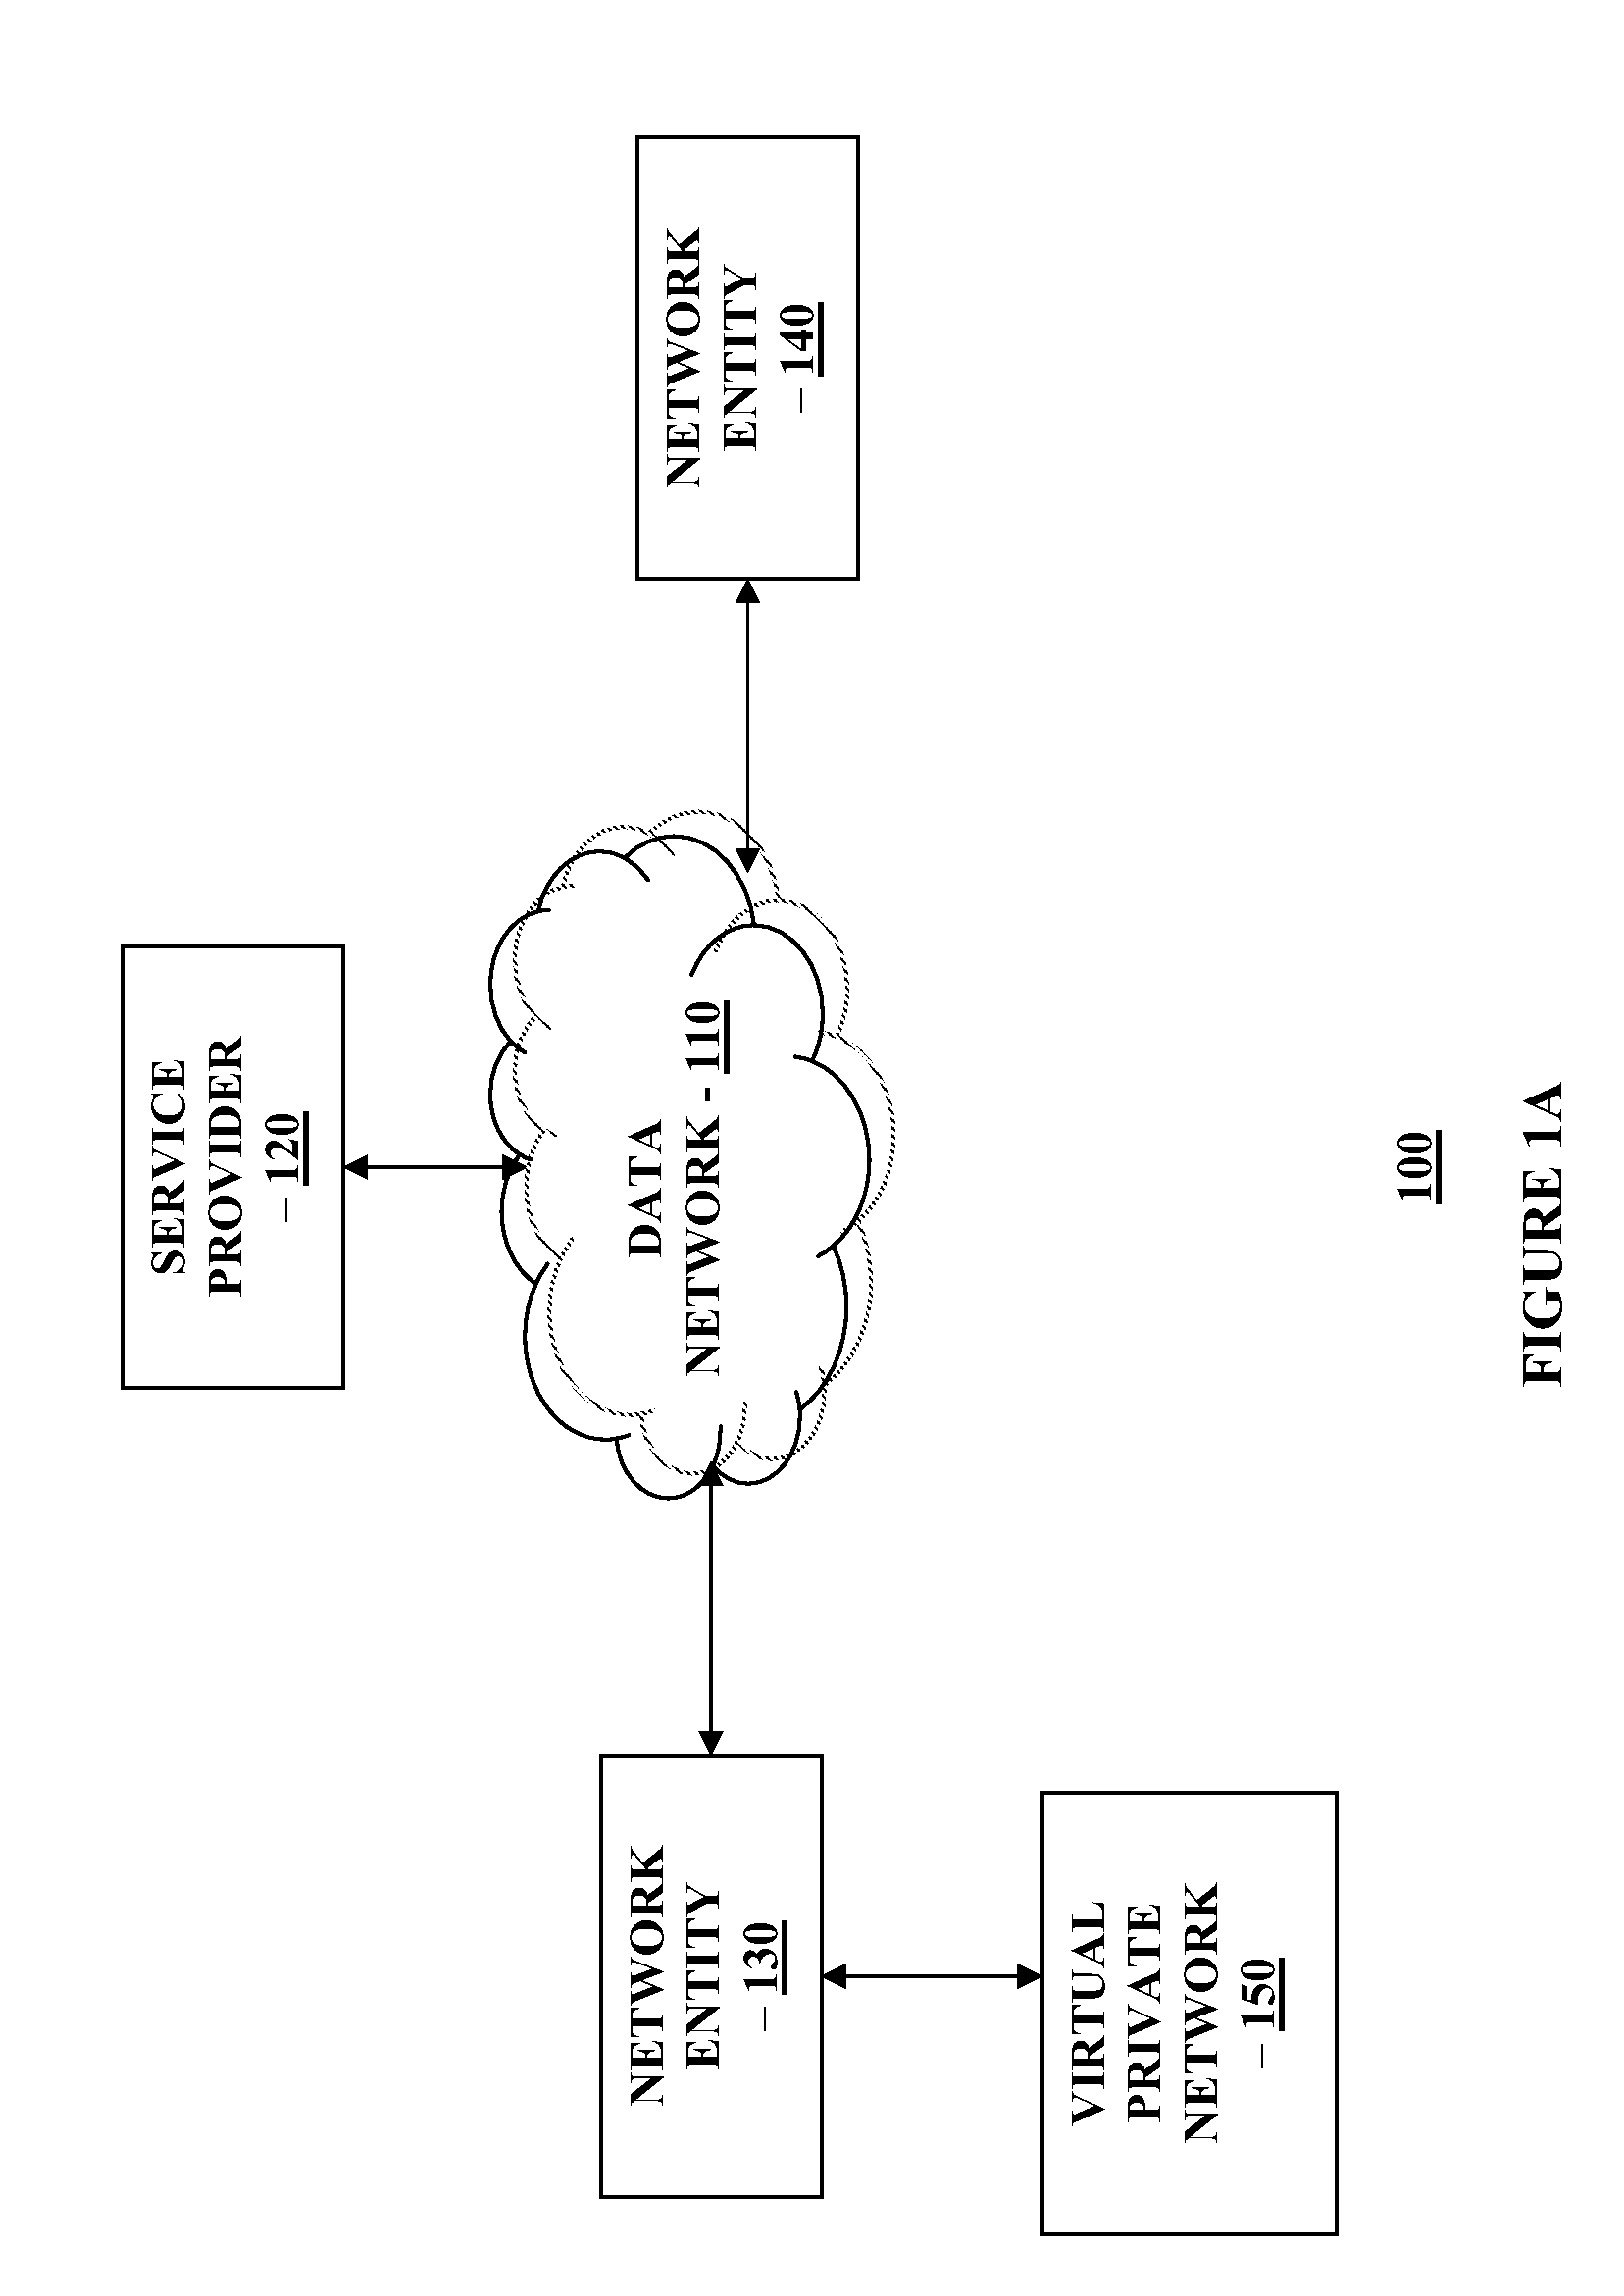 Method and system for providing connectivity outage detection for MPLS core networks based on service level agreement